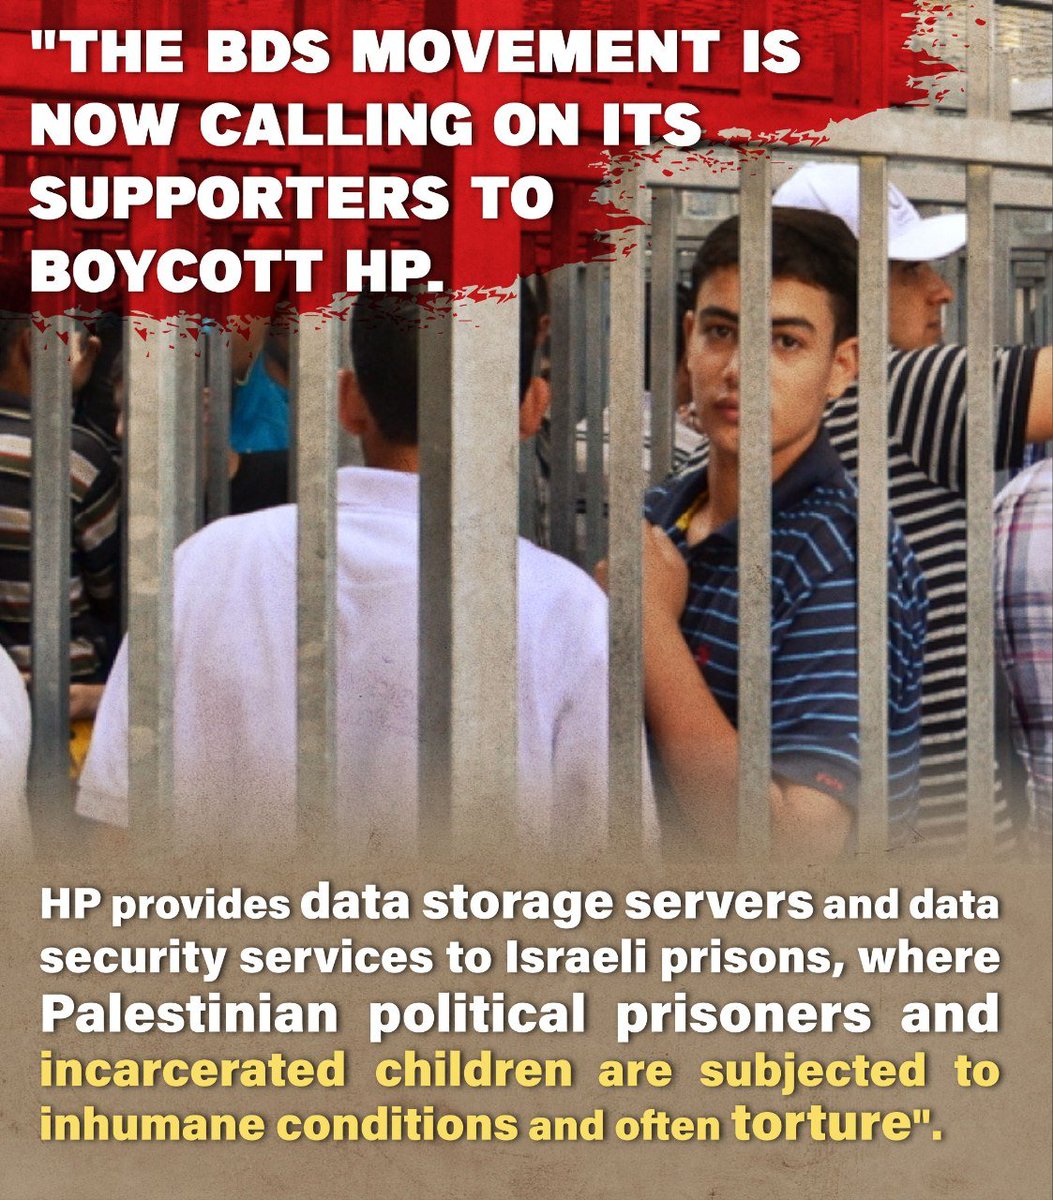 The #BDSMovement is now calling on its supporters to boycott HP. HP provides data storage servers and data security services to Israeli prisons, where Palestinian political prisoners and imprisoned children are subjected to inhumane conditions and often torture. #BoycottHP